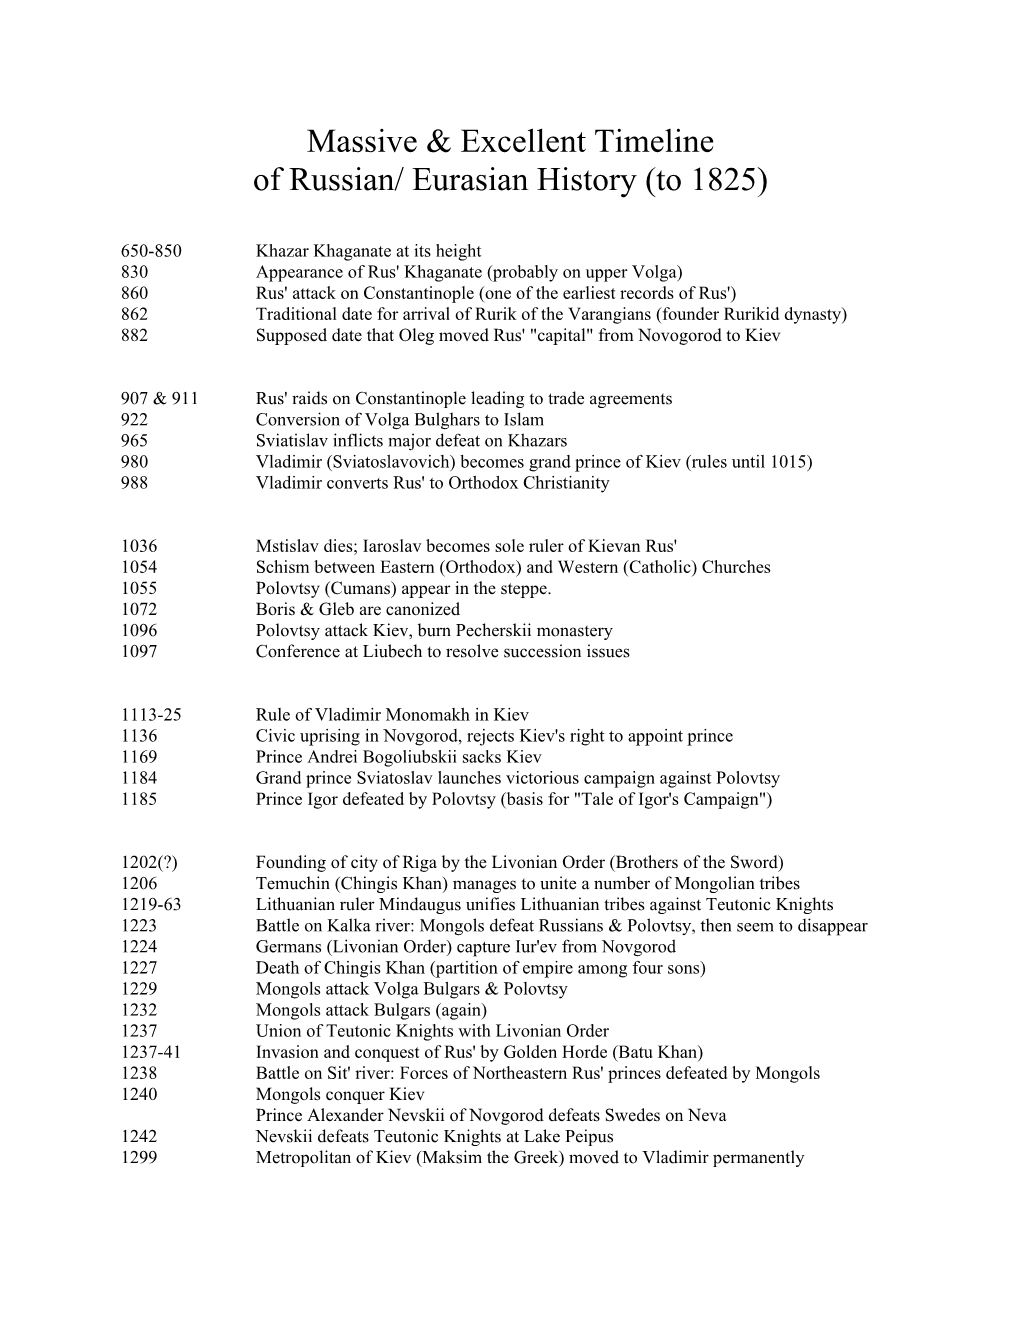 Massive and Excellent Timeline of Russian/ Eurasian History to 1825